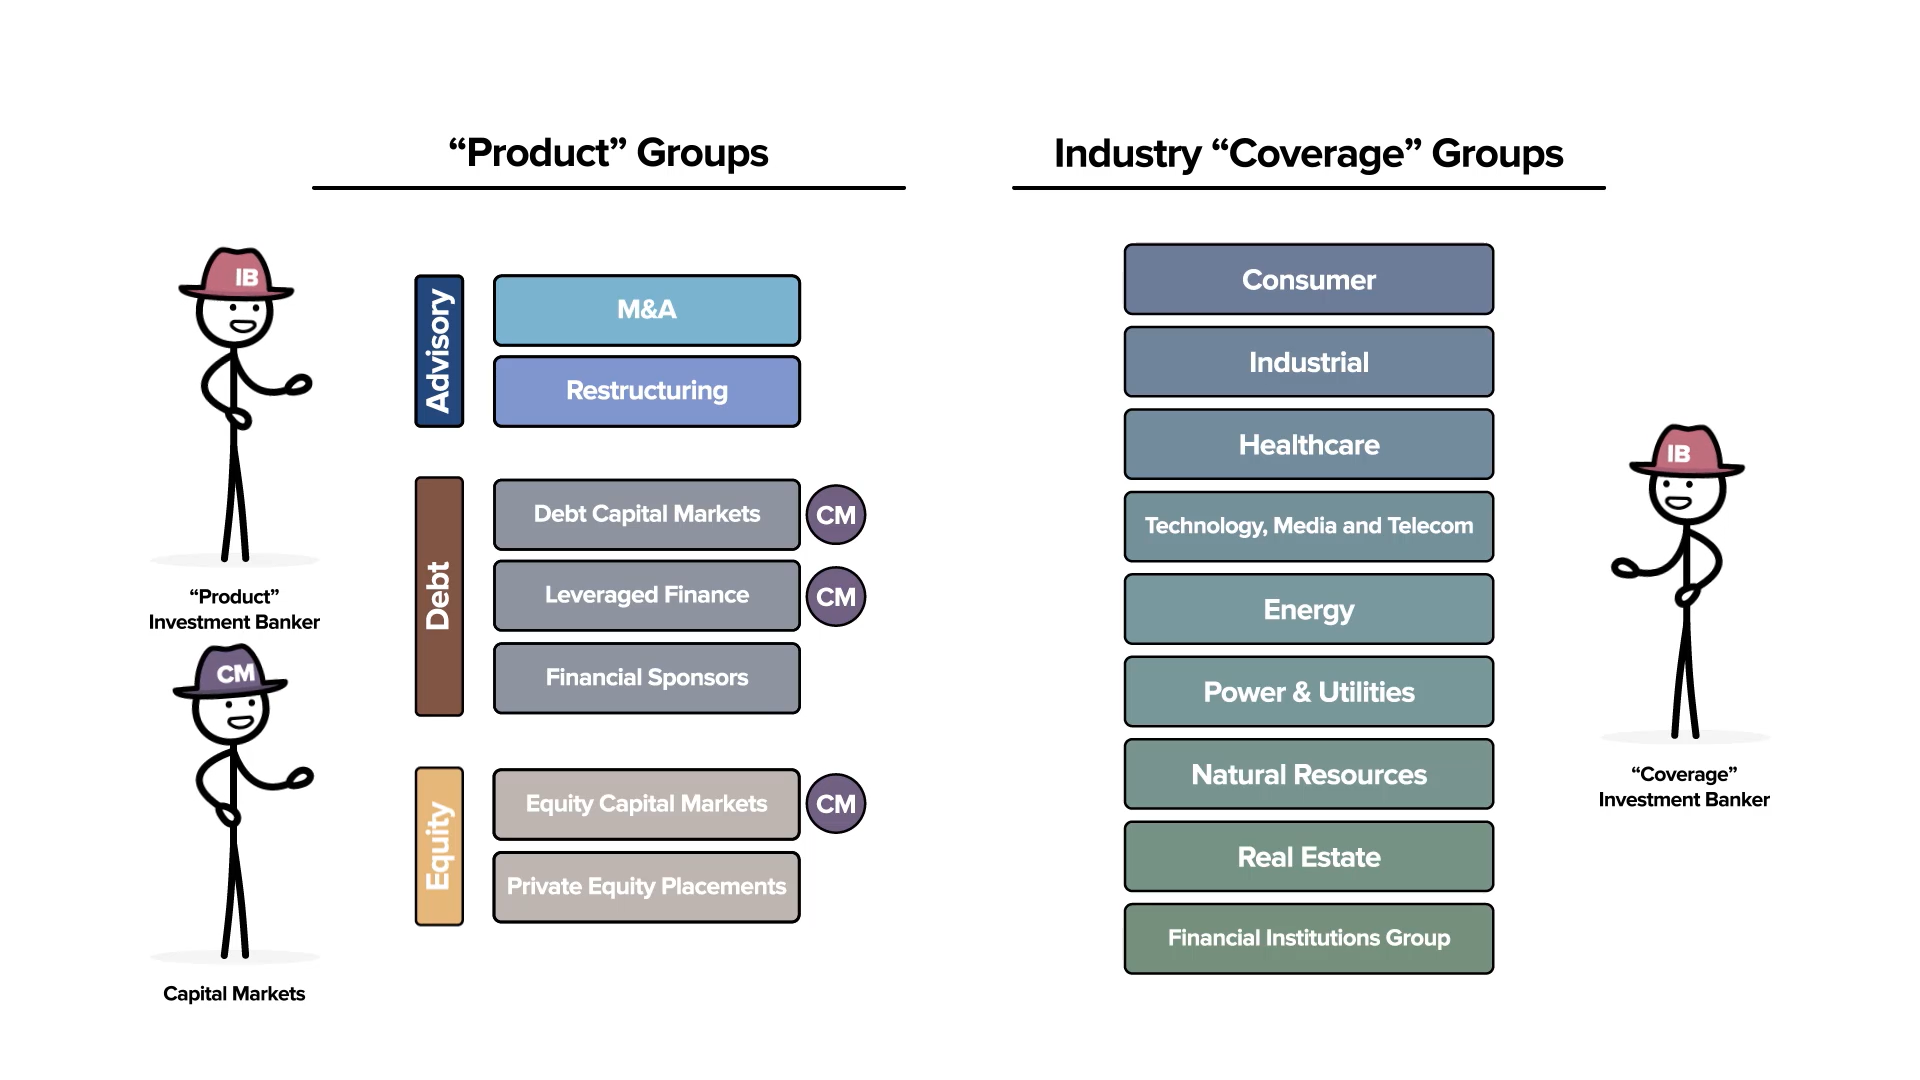 An image highlighting the groups that are typically included in Capital Markets within an Investment Bank